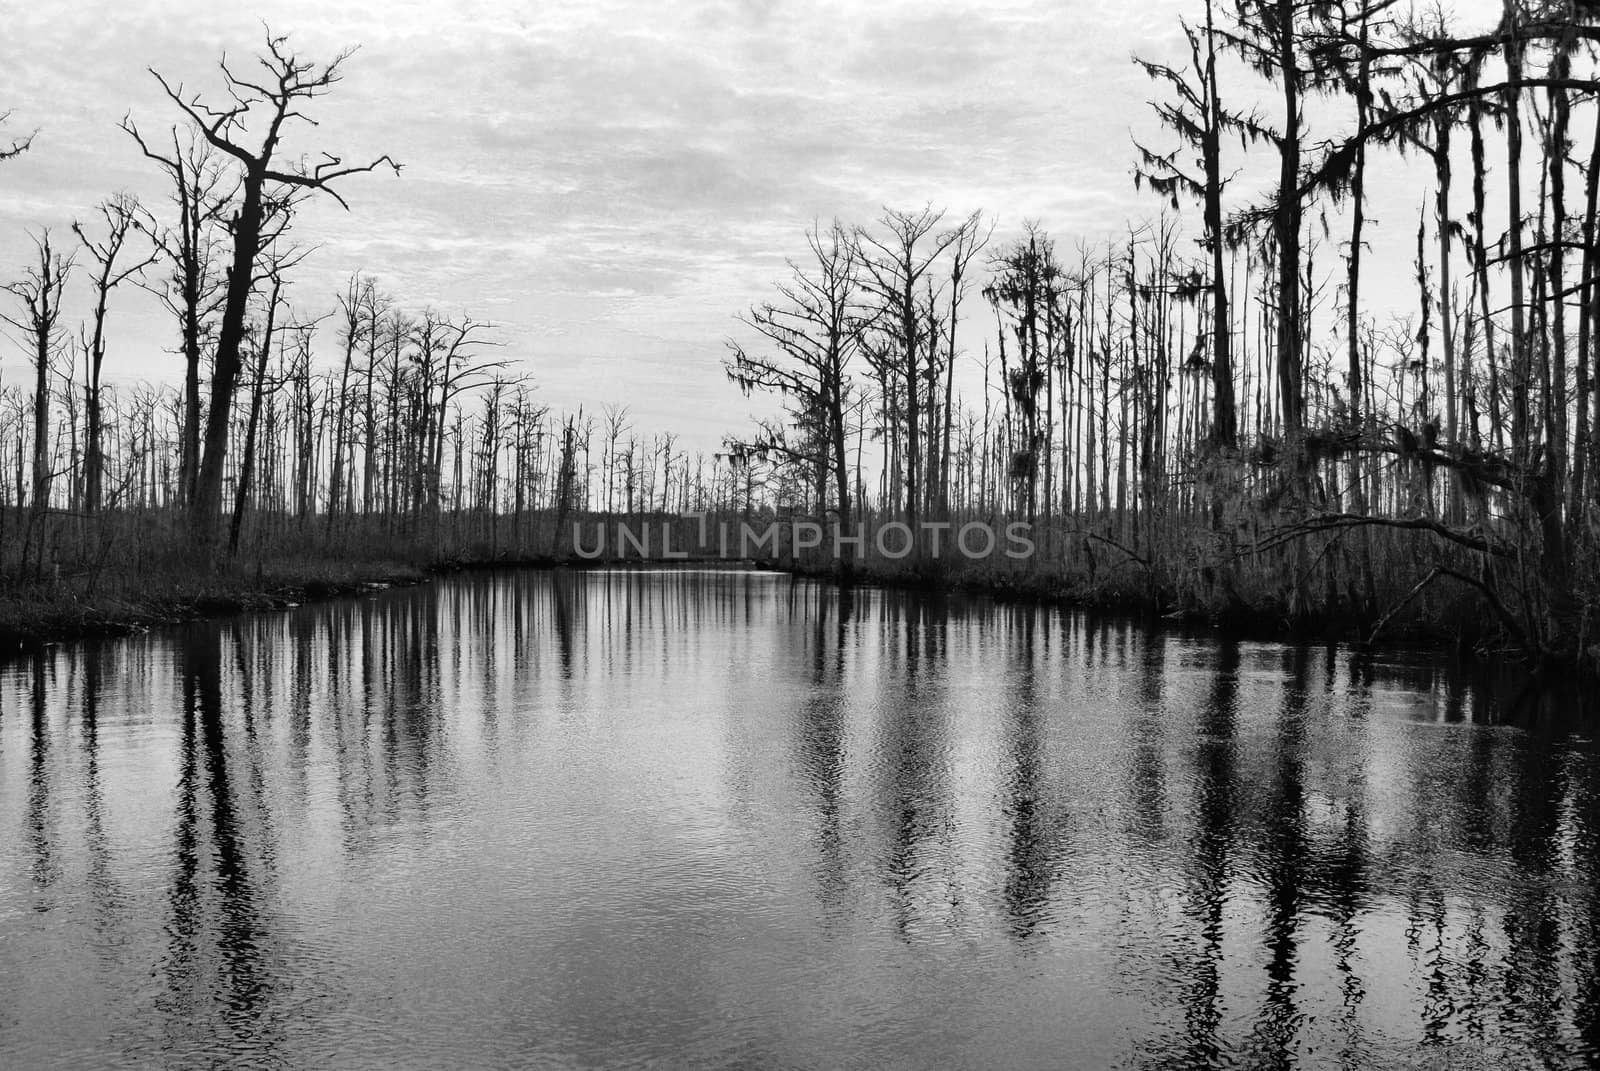 A view of the swamp in eastern  North Carolina. Show in Black and White